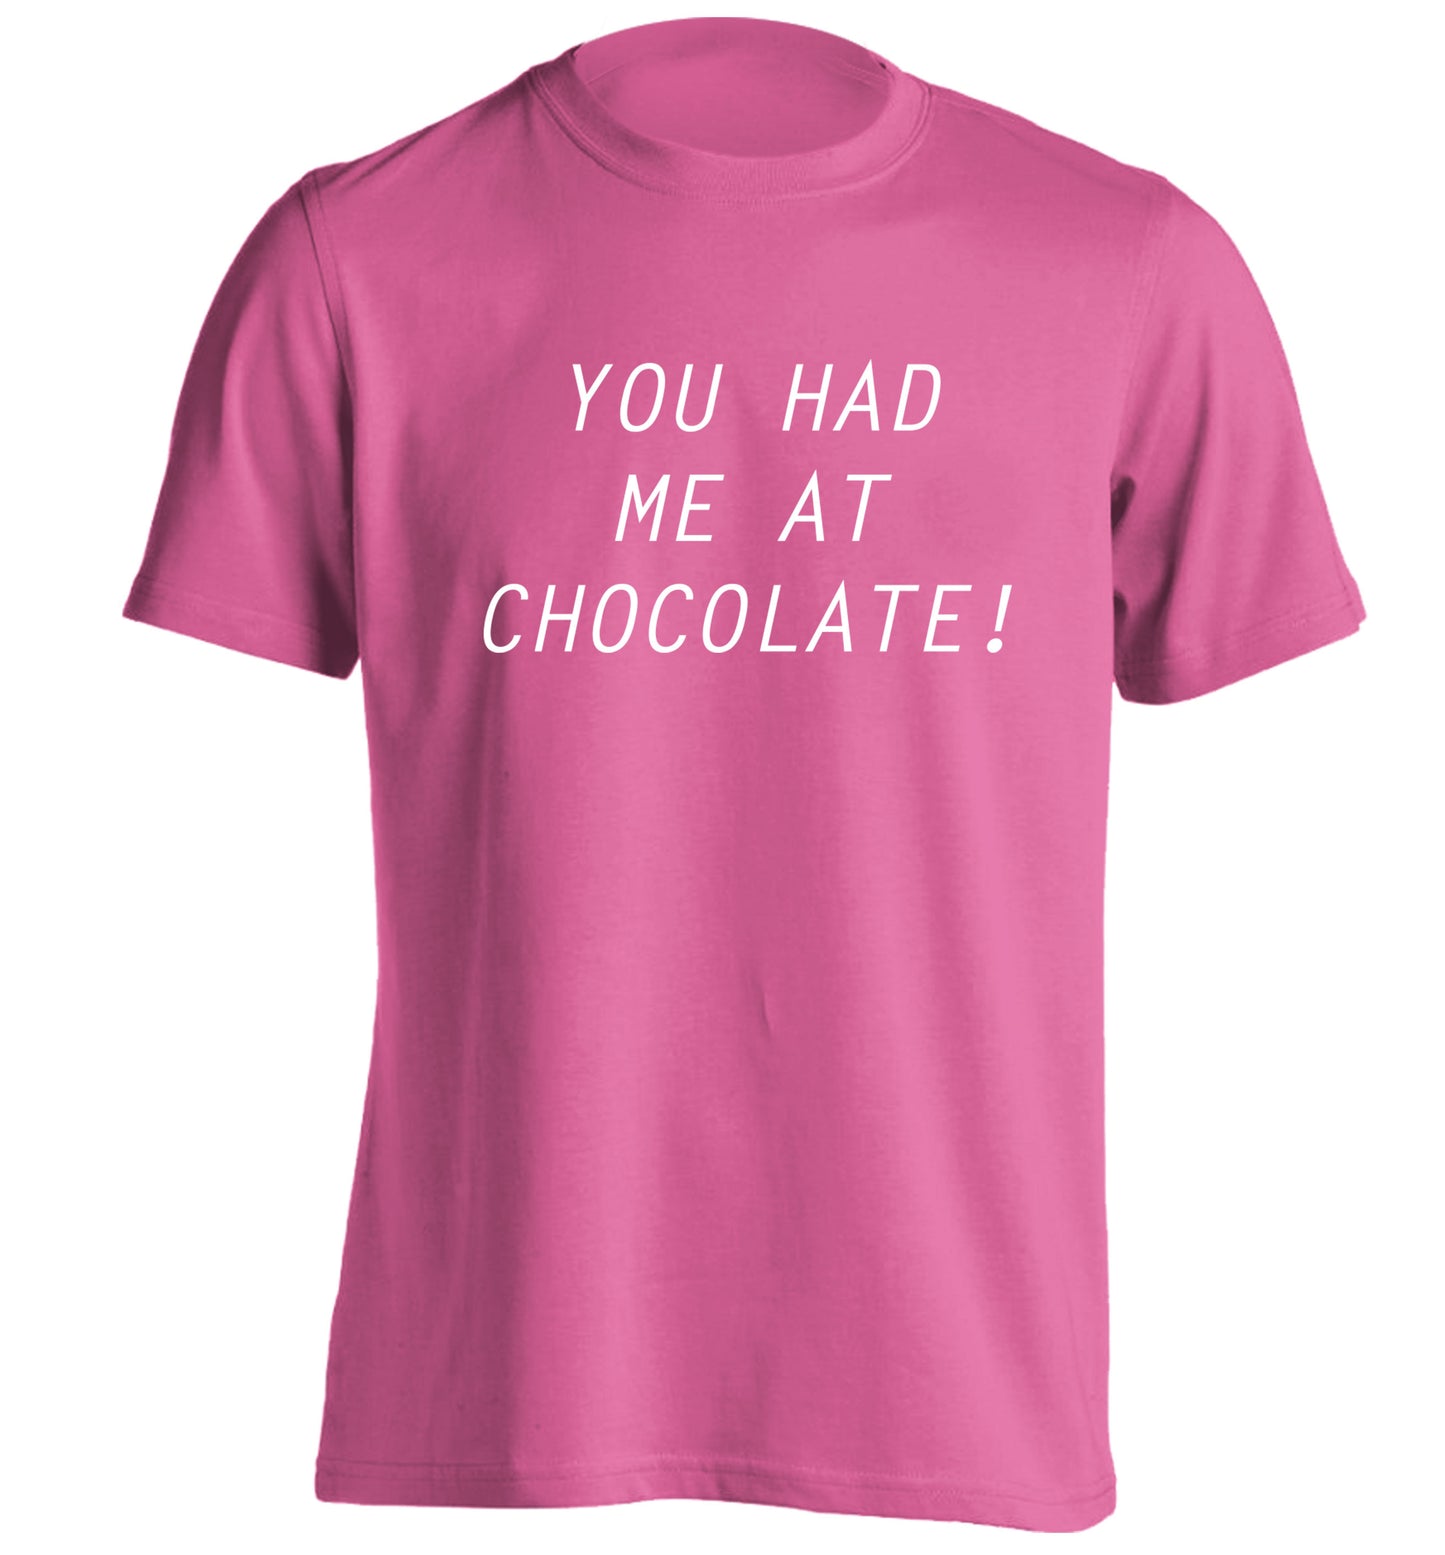 You had me at chocolate adults unisex pink Tshirt 2XL